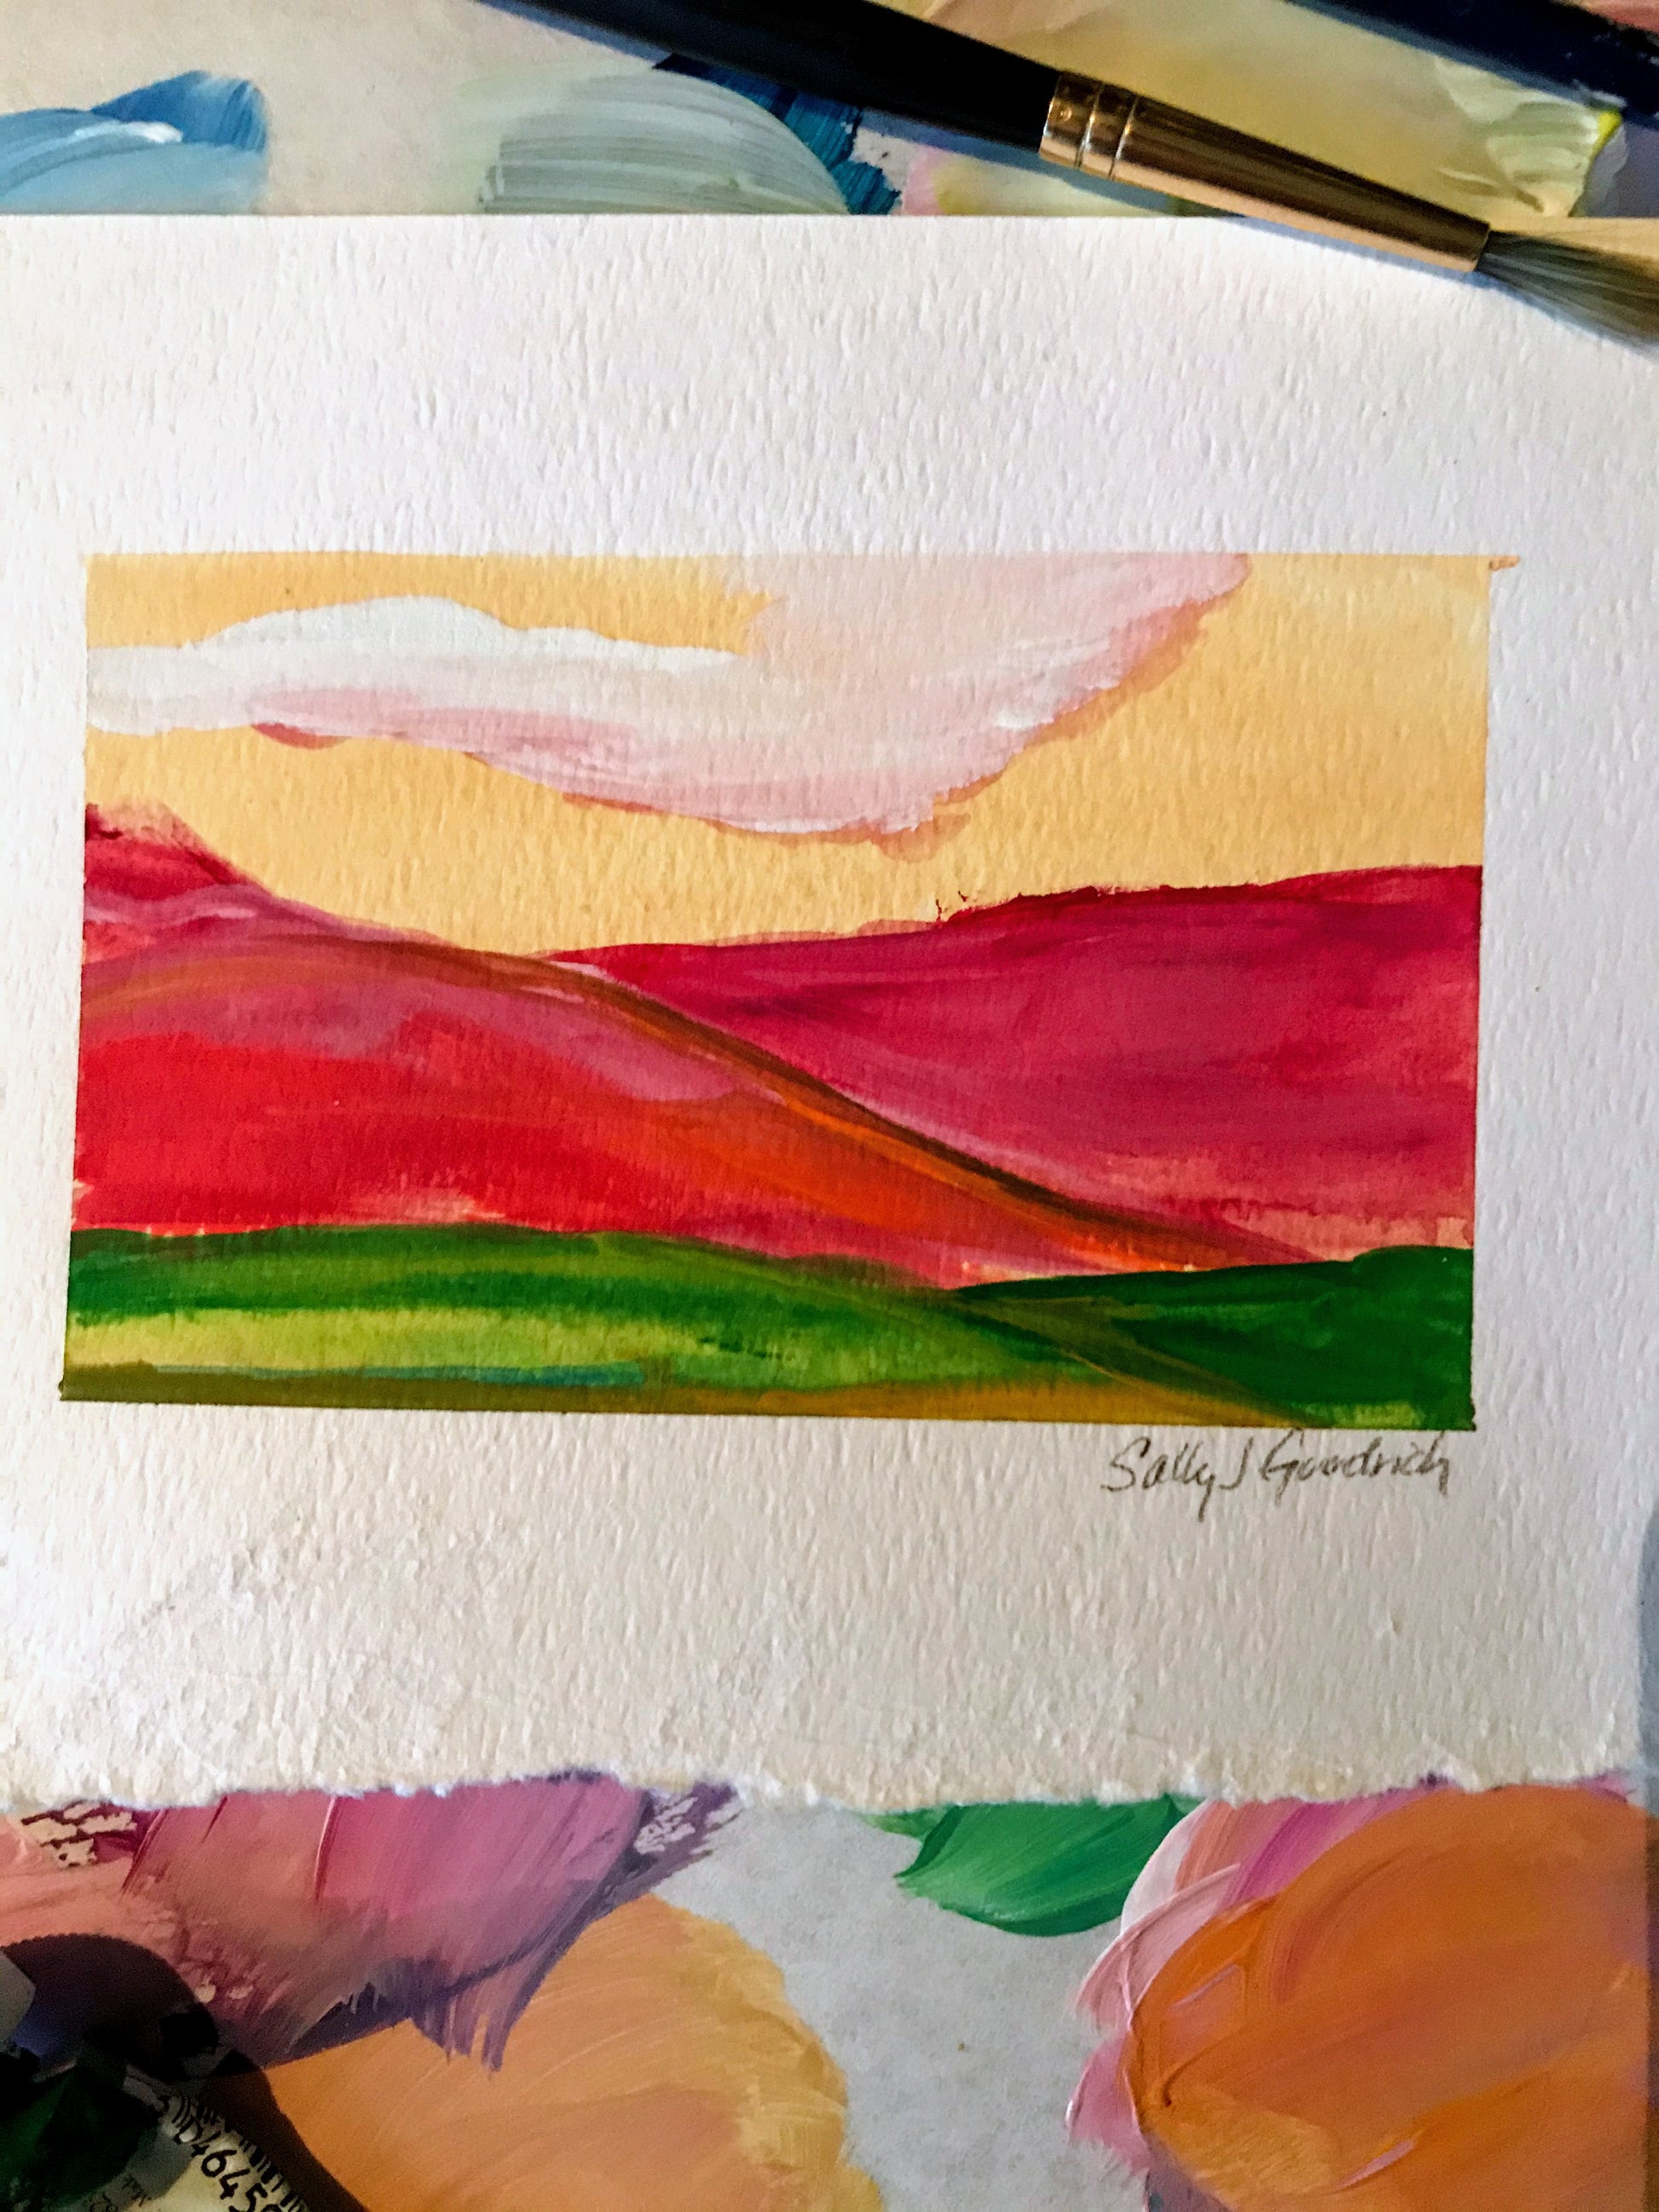 January 12,  2021 daily painting practice  approximately 5" x 4"  Mountain Landscape of the beautiful Blue Ridge mountains in Salem, Virginia  gouache on paper  ready for framing  modern southern painting  free shipping  follow me on instagram or sign up for the emails to get the first look at the daily painting challenge.